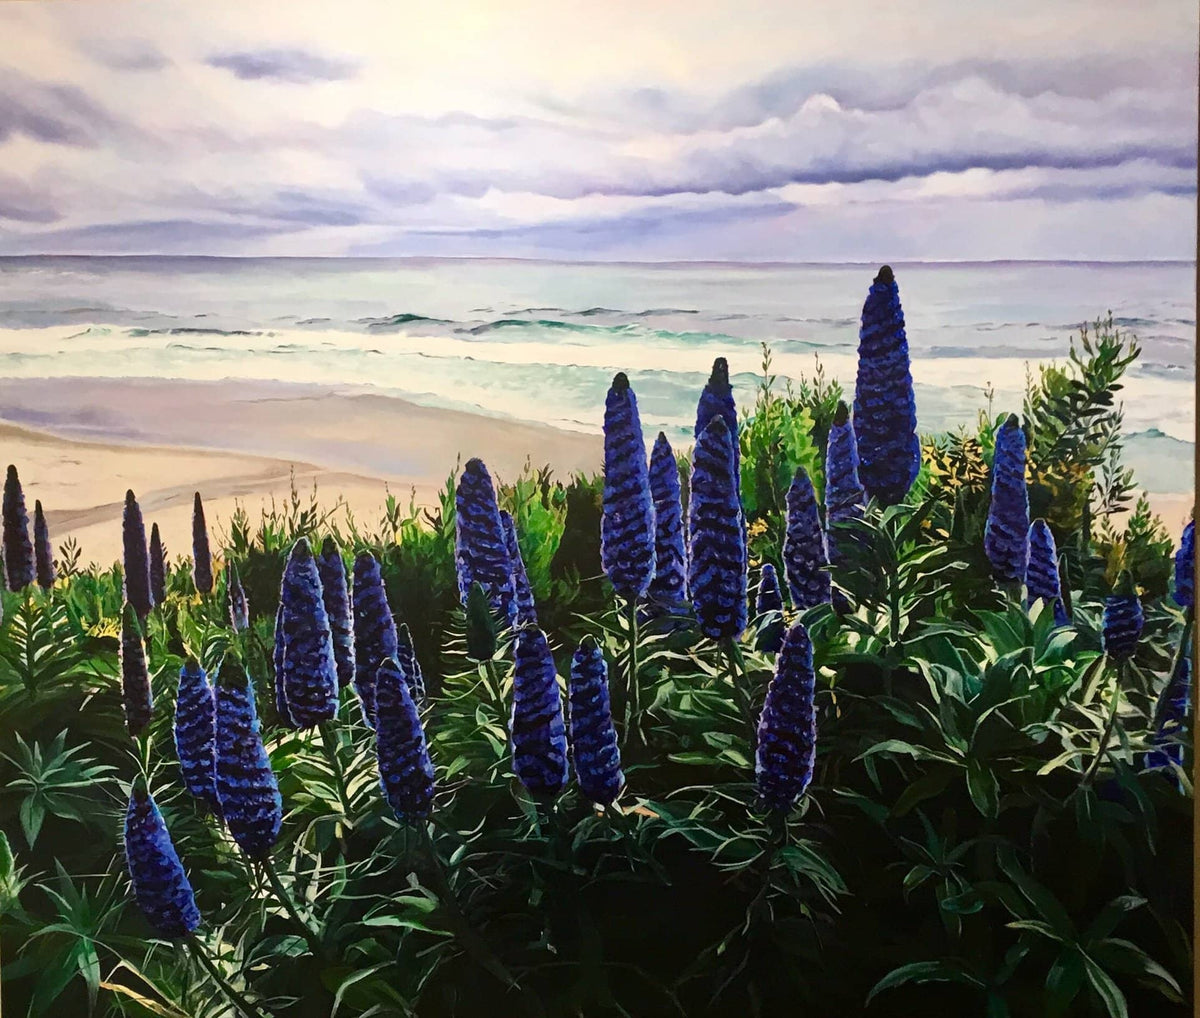 California Seascape painting along the coast of Carmel with strong blue flowers